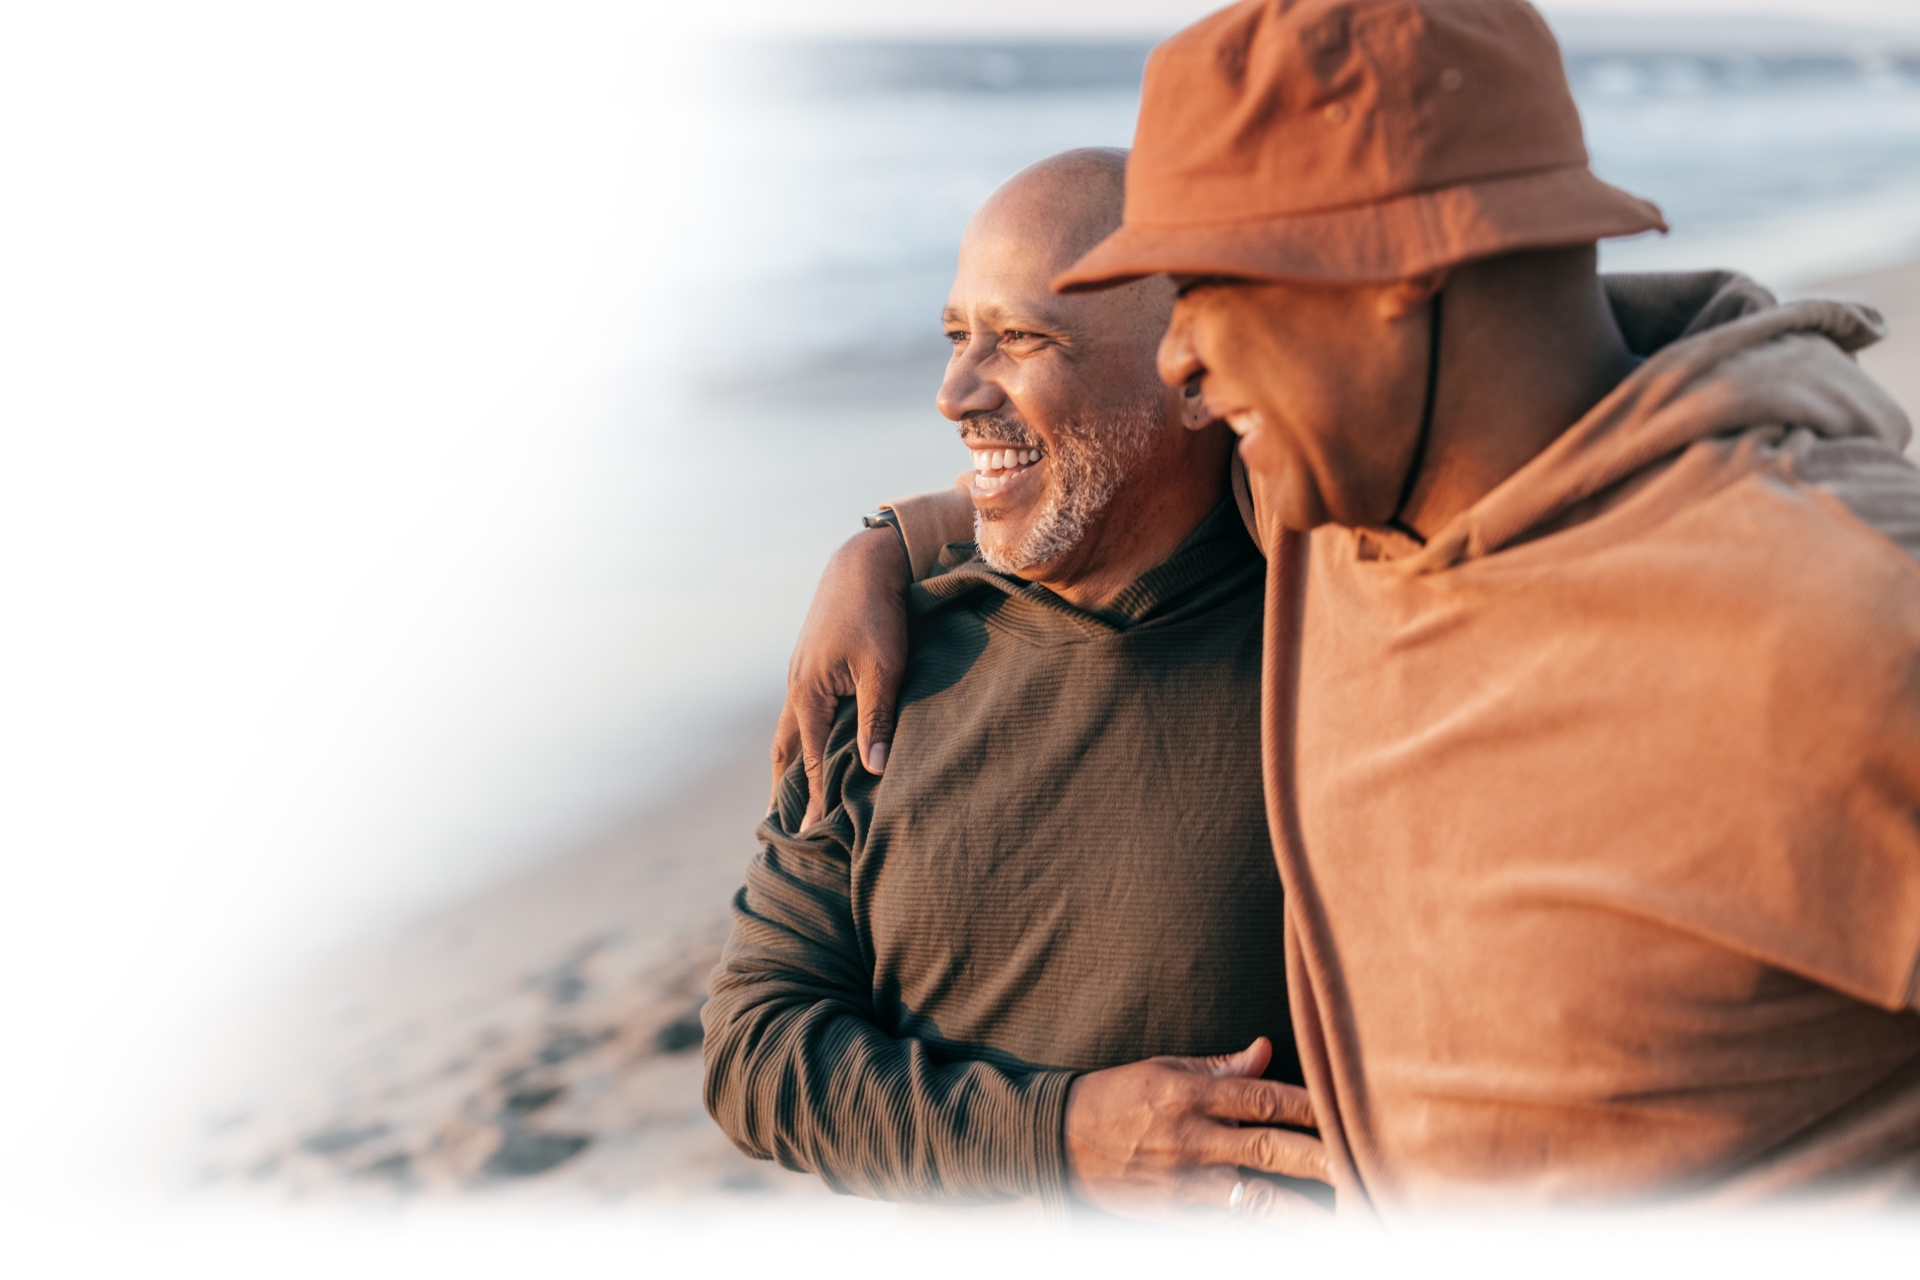 Two men on the beach smiling